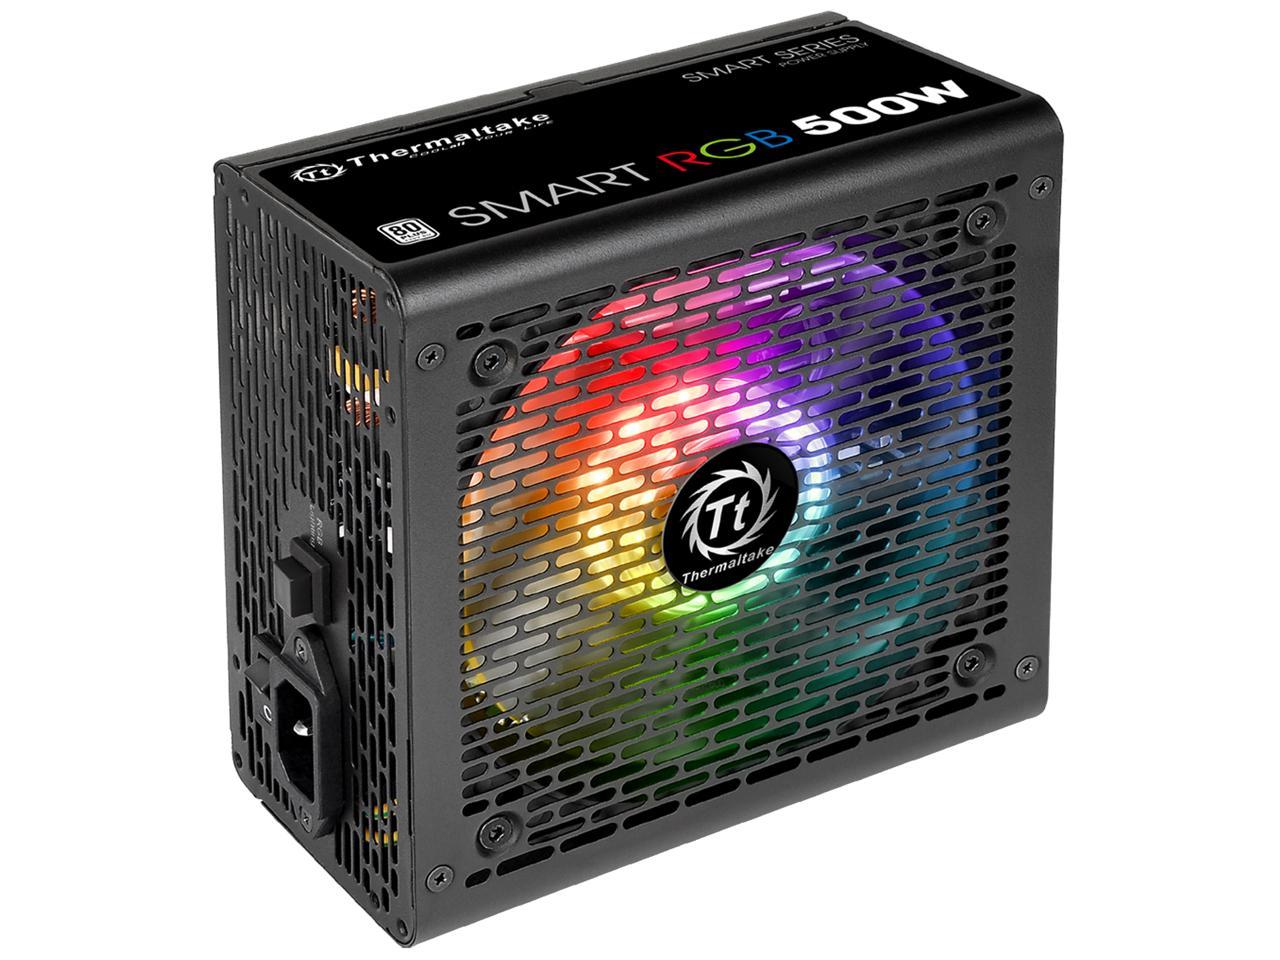 Thermaltake Smart RGB Series 500W SLI/CrossFire Ready Continuous Power ATX 12V V2.3 80 PLUS Certified 5 Year Warranty Active PFC Power Supply Haswell Ready PS-SPR-0500NHFAWU-1